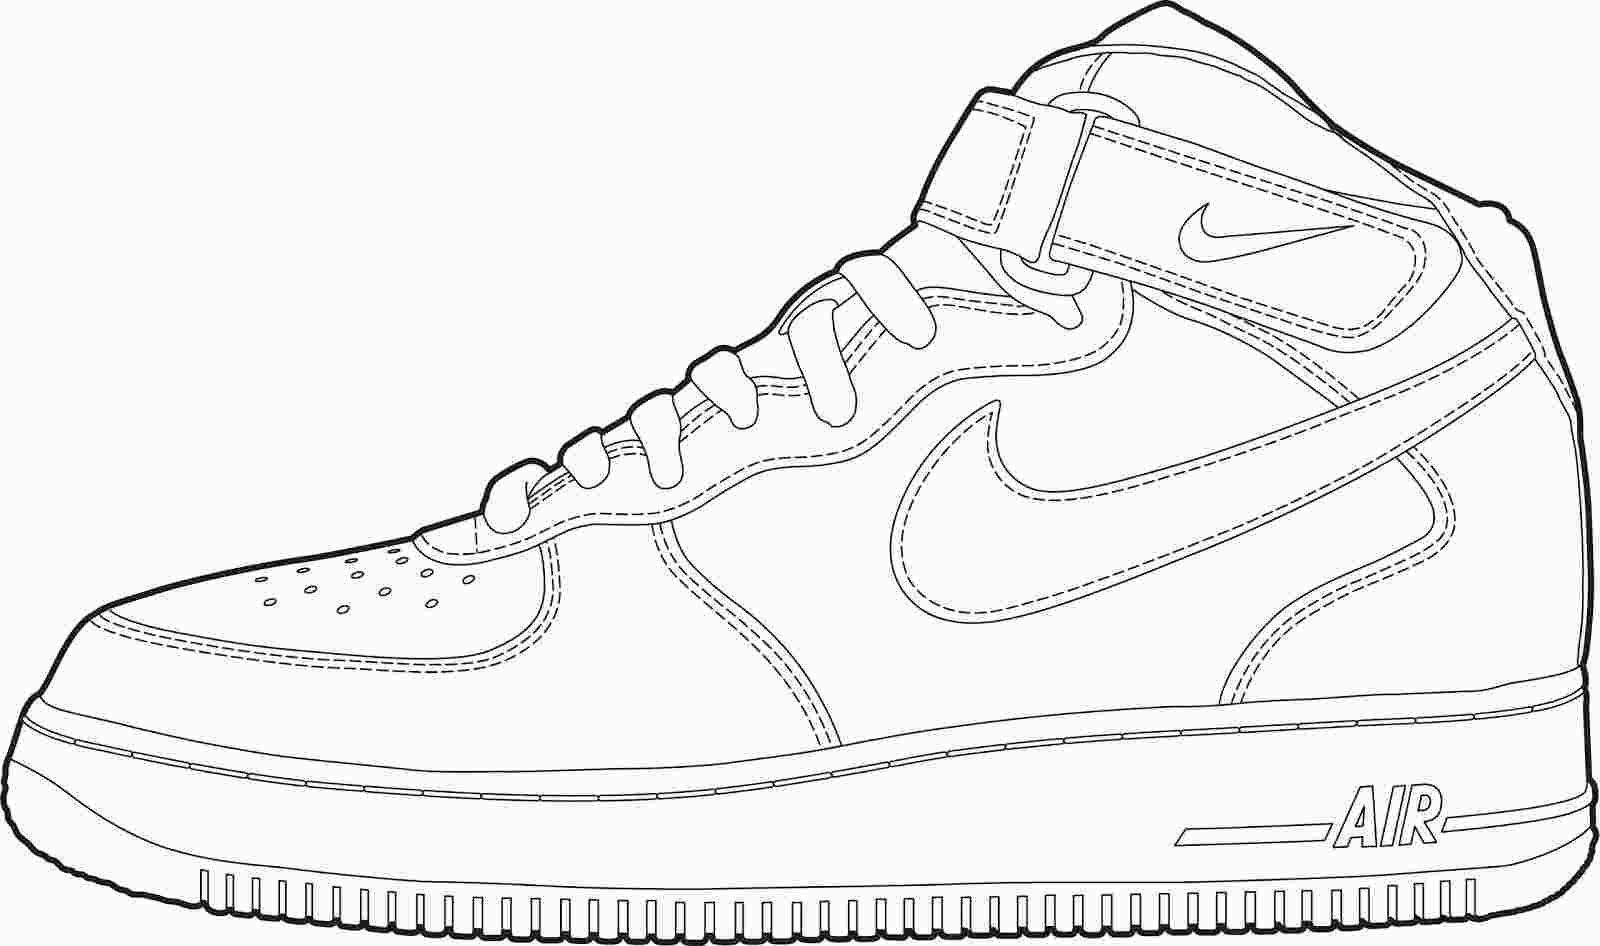 Coloring : Air Forceng Book Sneakers Sketch Pictures Of Shoes Uncategorized  Nike Shoe Sheets To Print Tennis 65 Shoe Coloring Sheets Image Inspirations  ~ Sstra Coloring